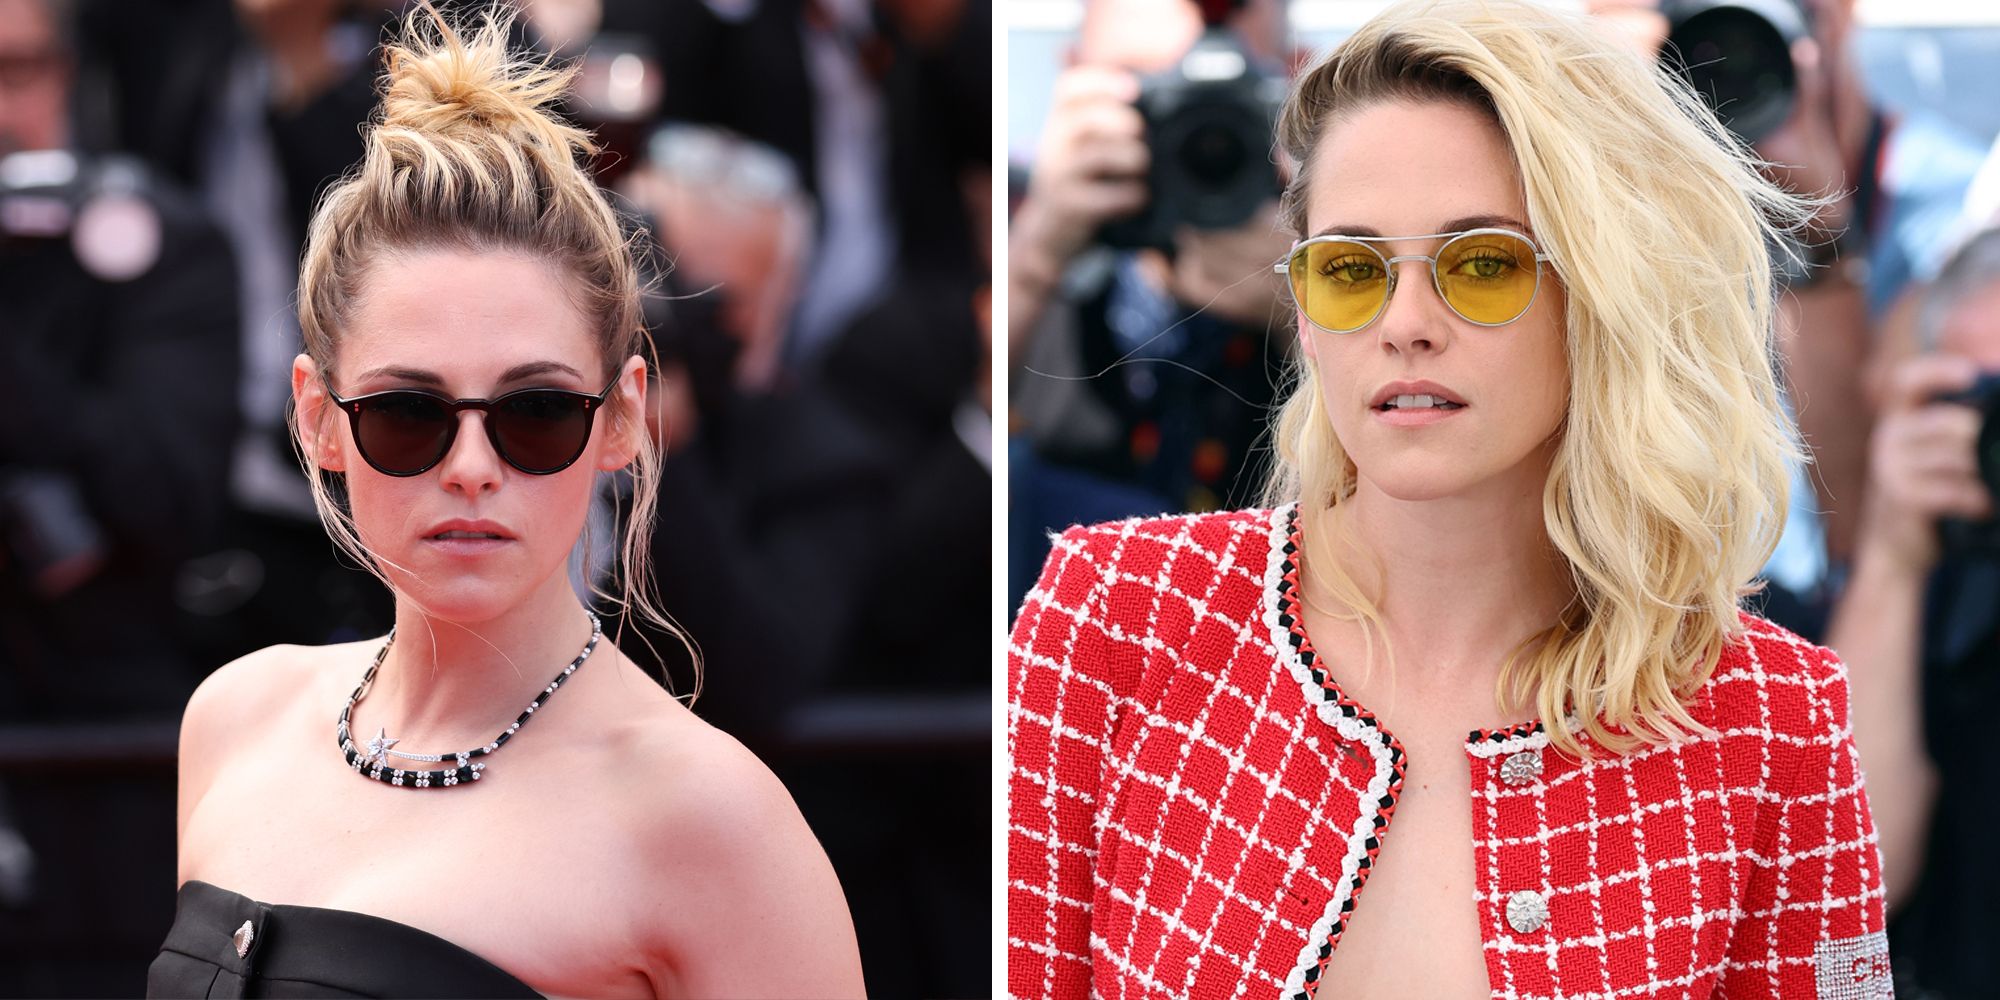 Kristen Stewart on Returning to Cannes, Taking Fashion Risks and More – WWD